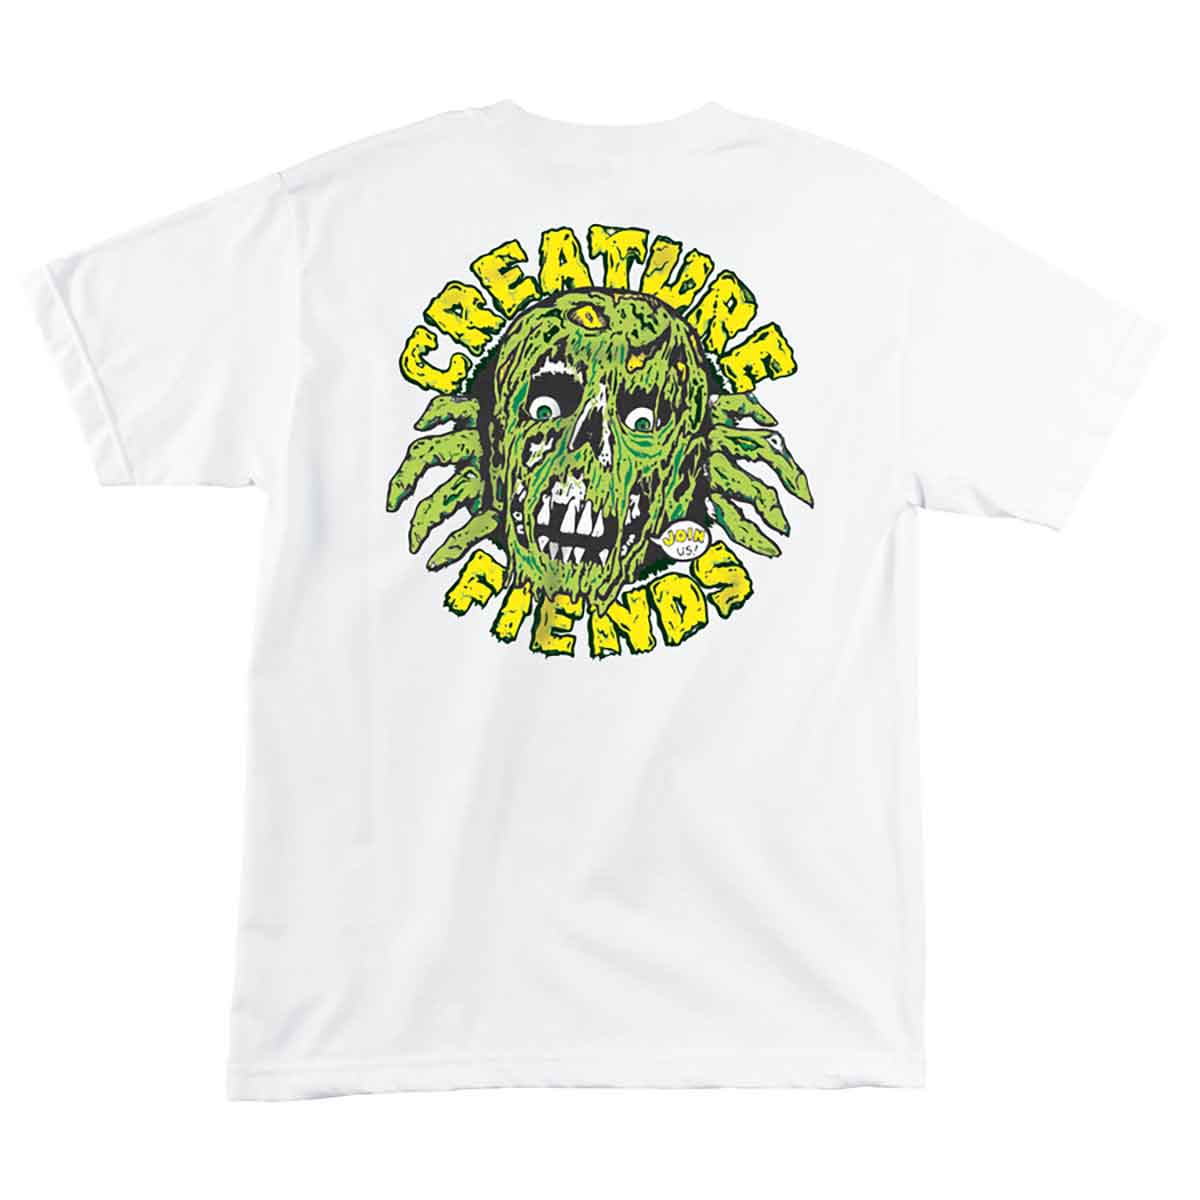 Creature Skateboards Offerings SS Men's White T-Shirt FREE SHIPPING! 